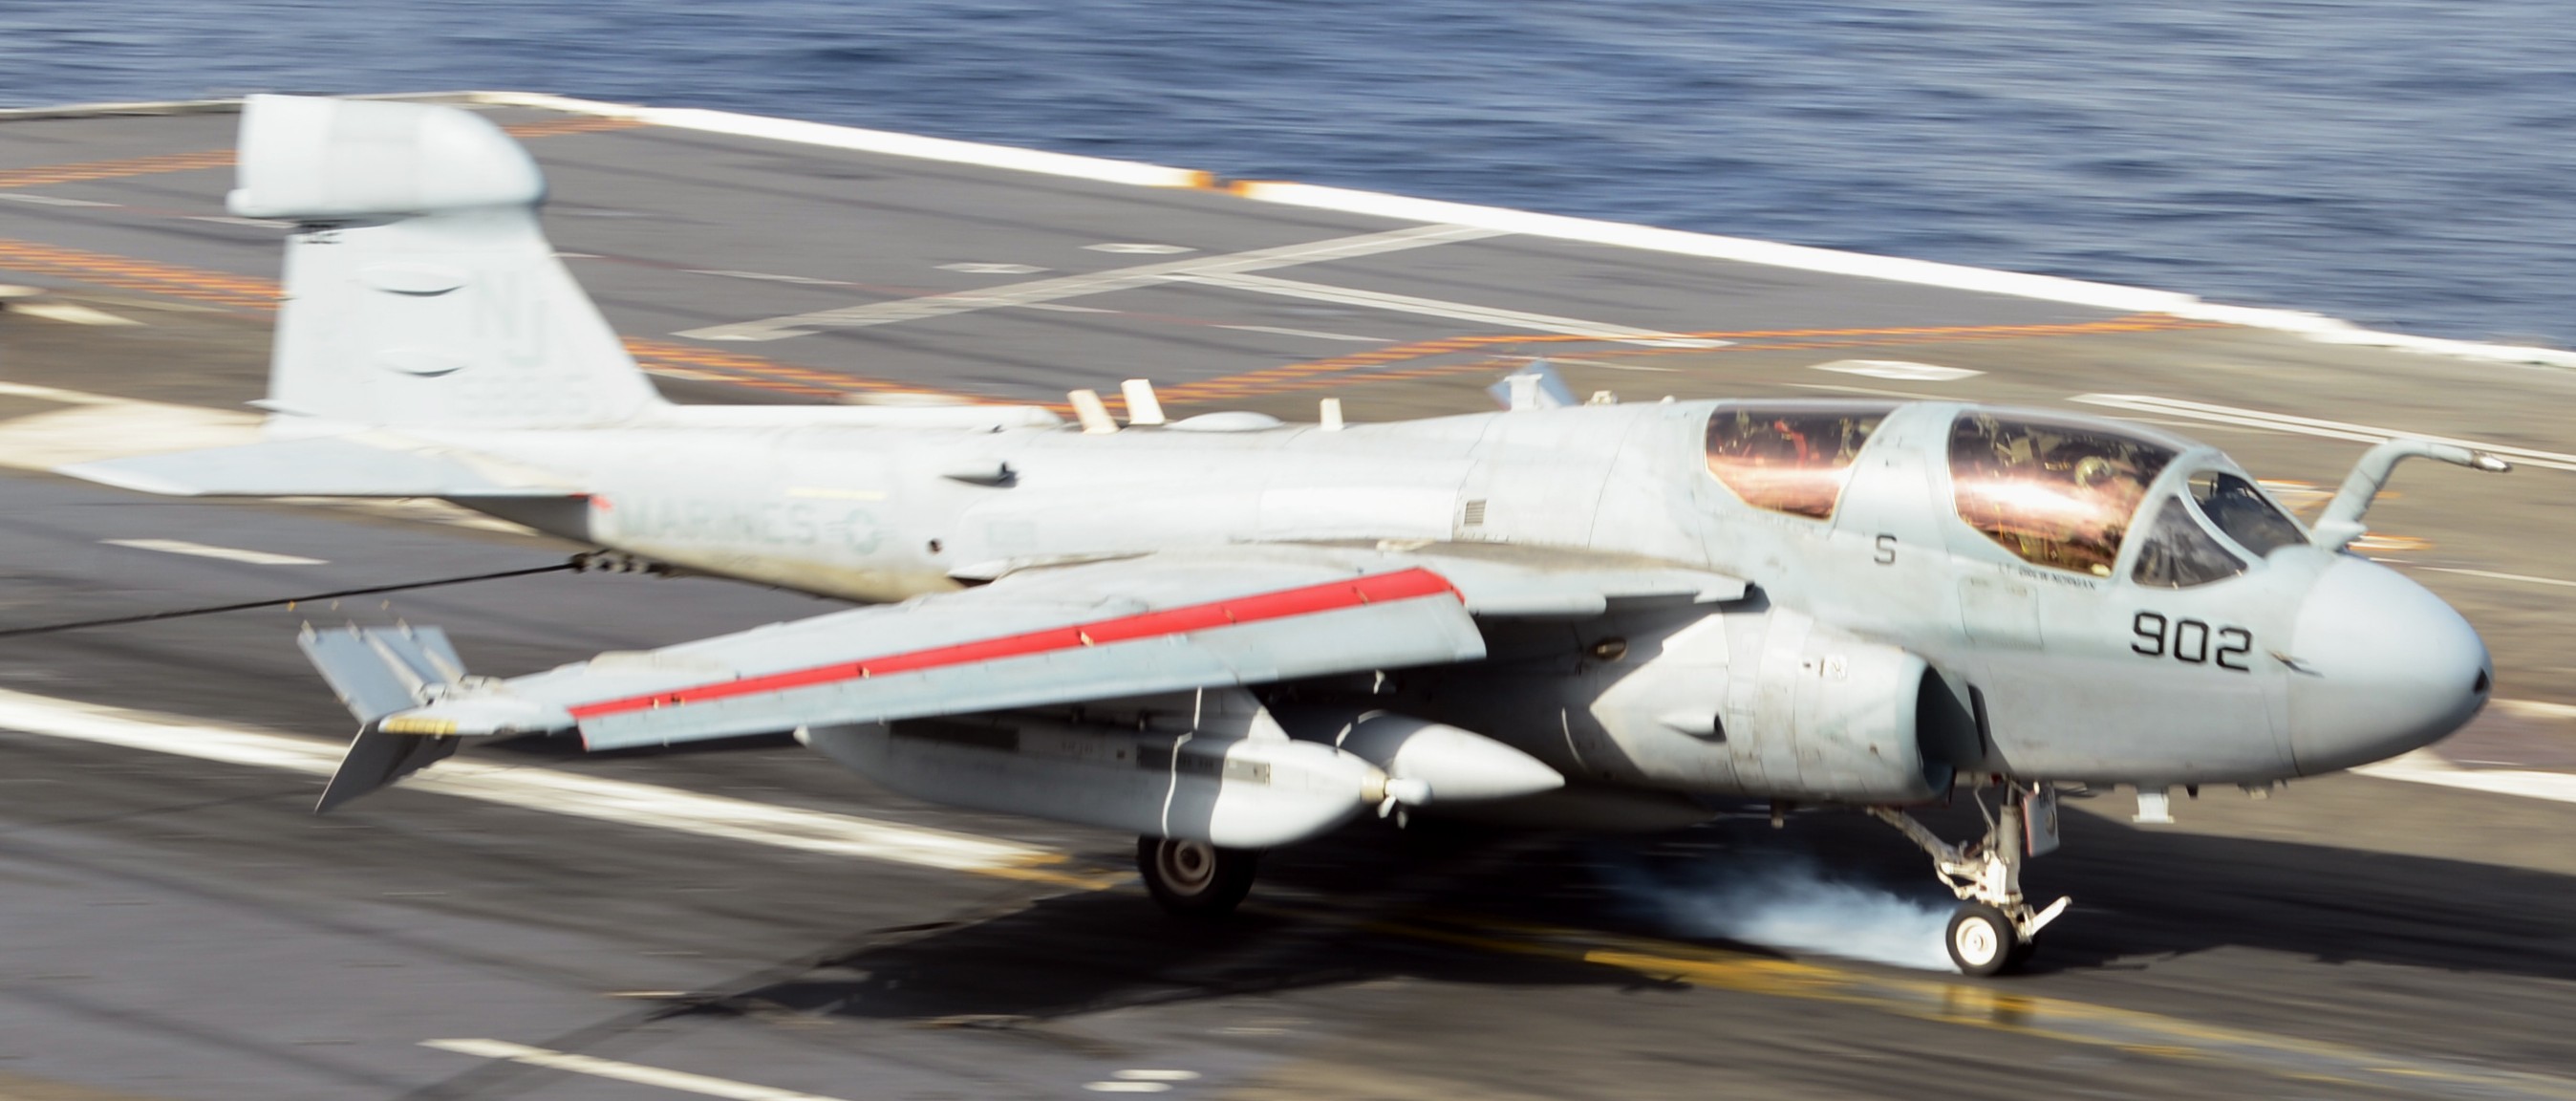 vaq-129 vikings electronic attack squadron fleet replacement frs us navy ea-6b prowler 67